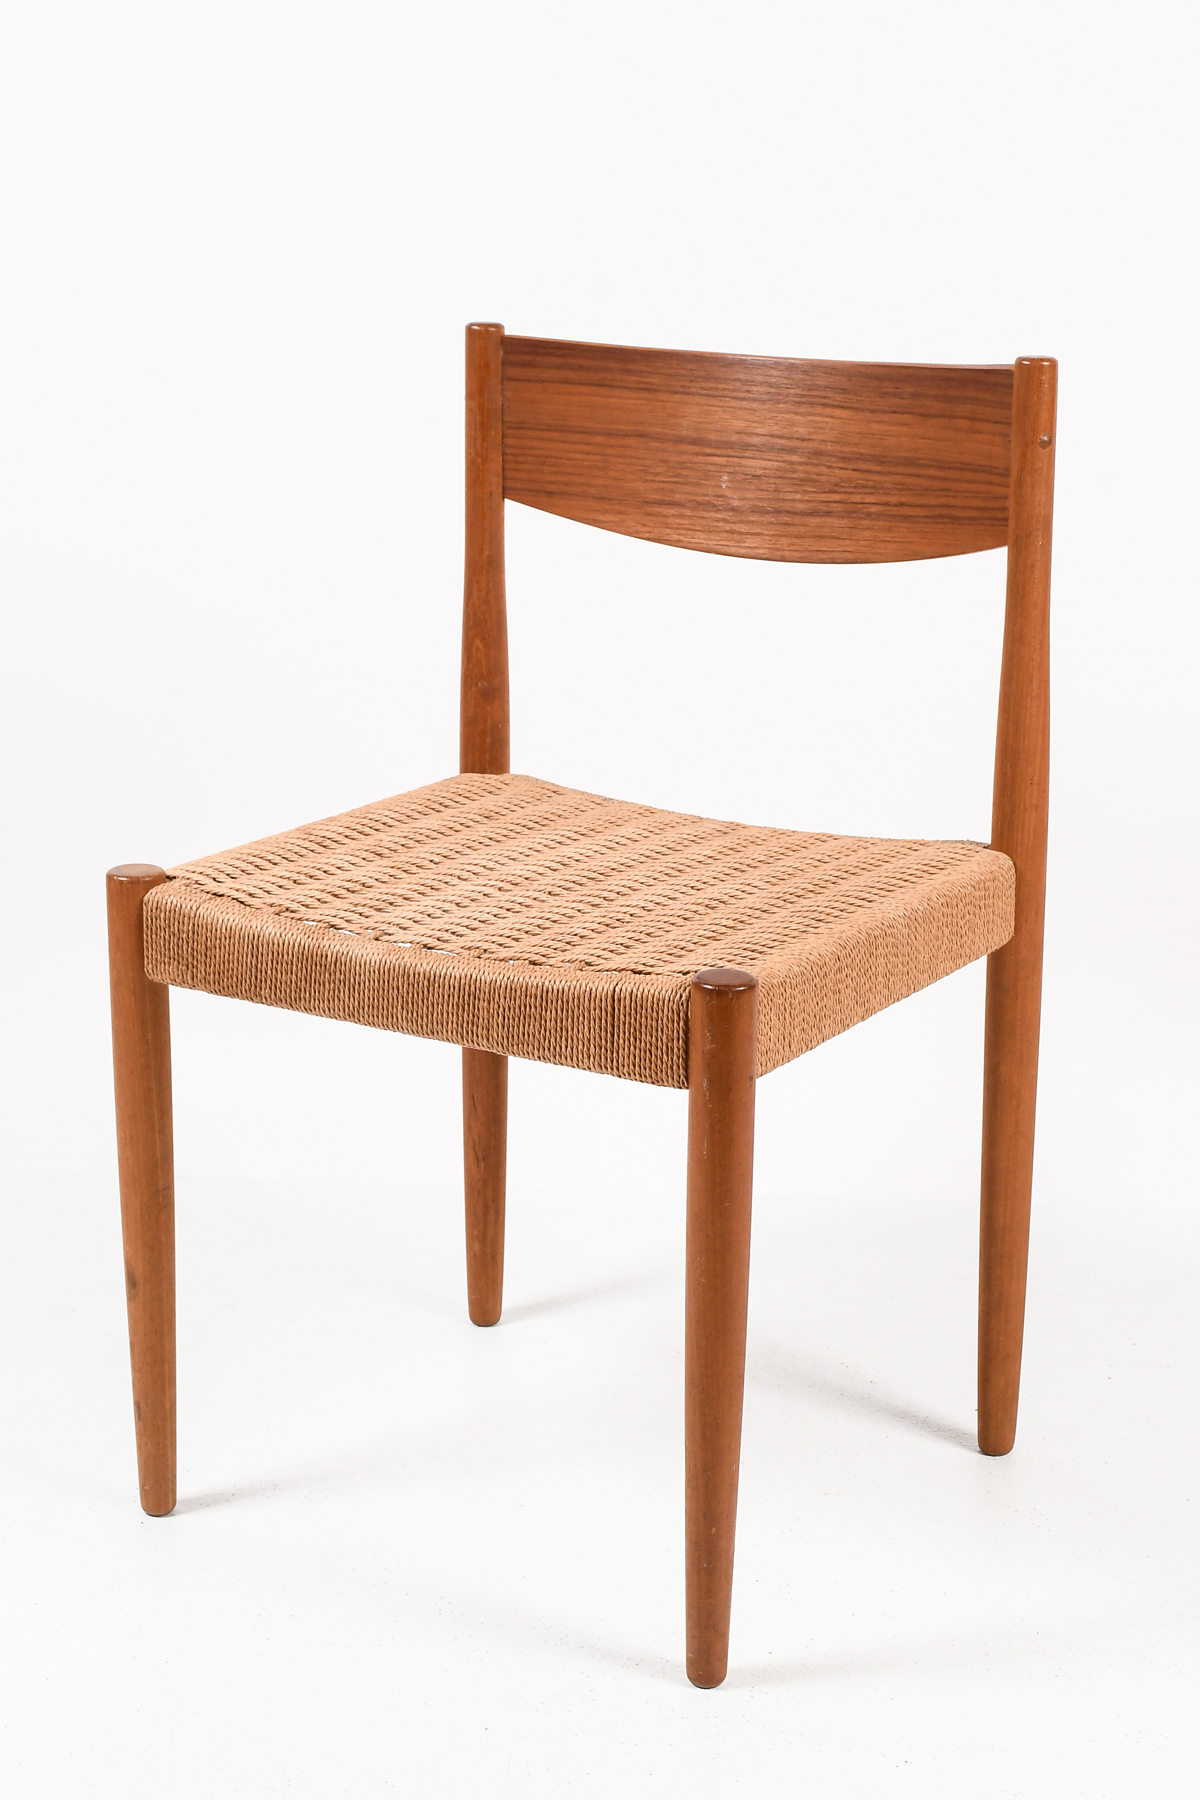 DANISH PAPERCORD SIDE CHAIR Poul 2ed3b2